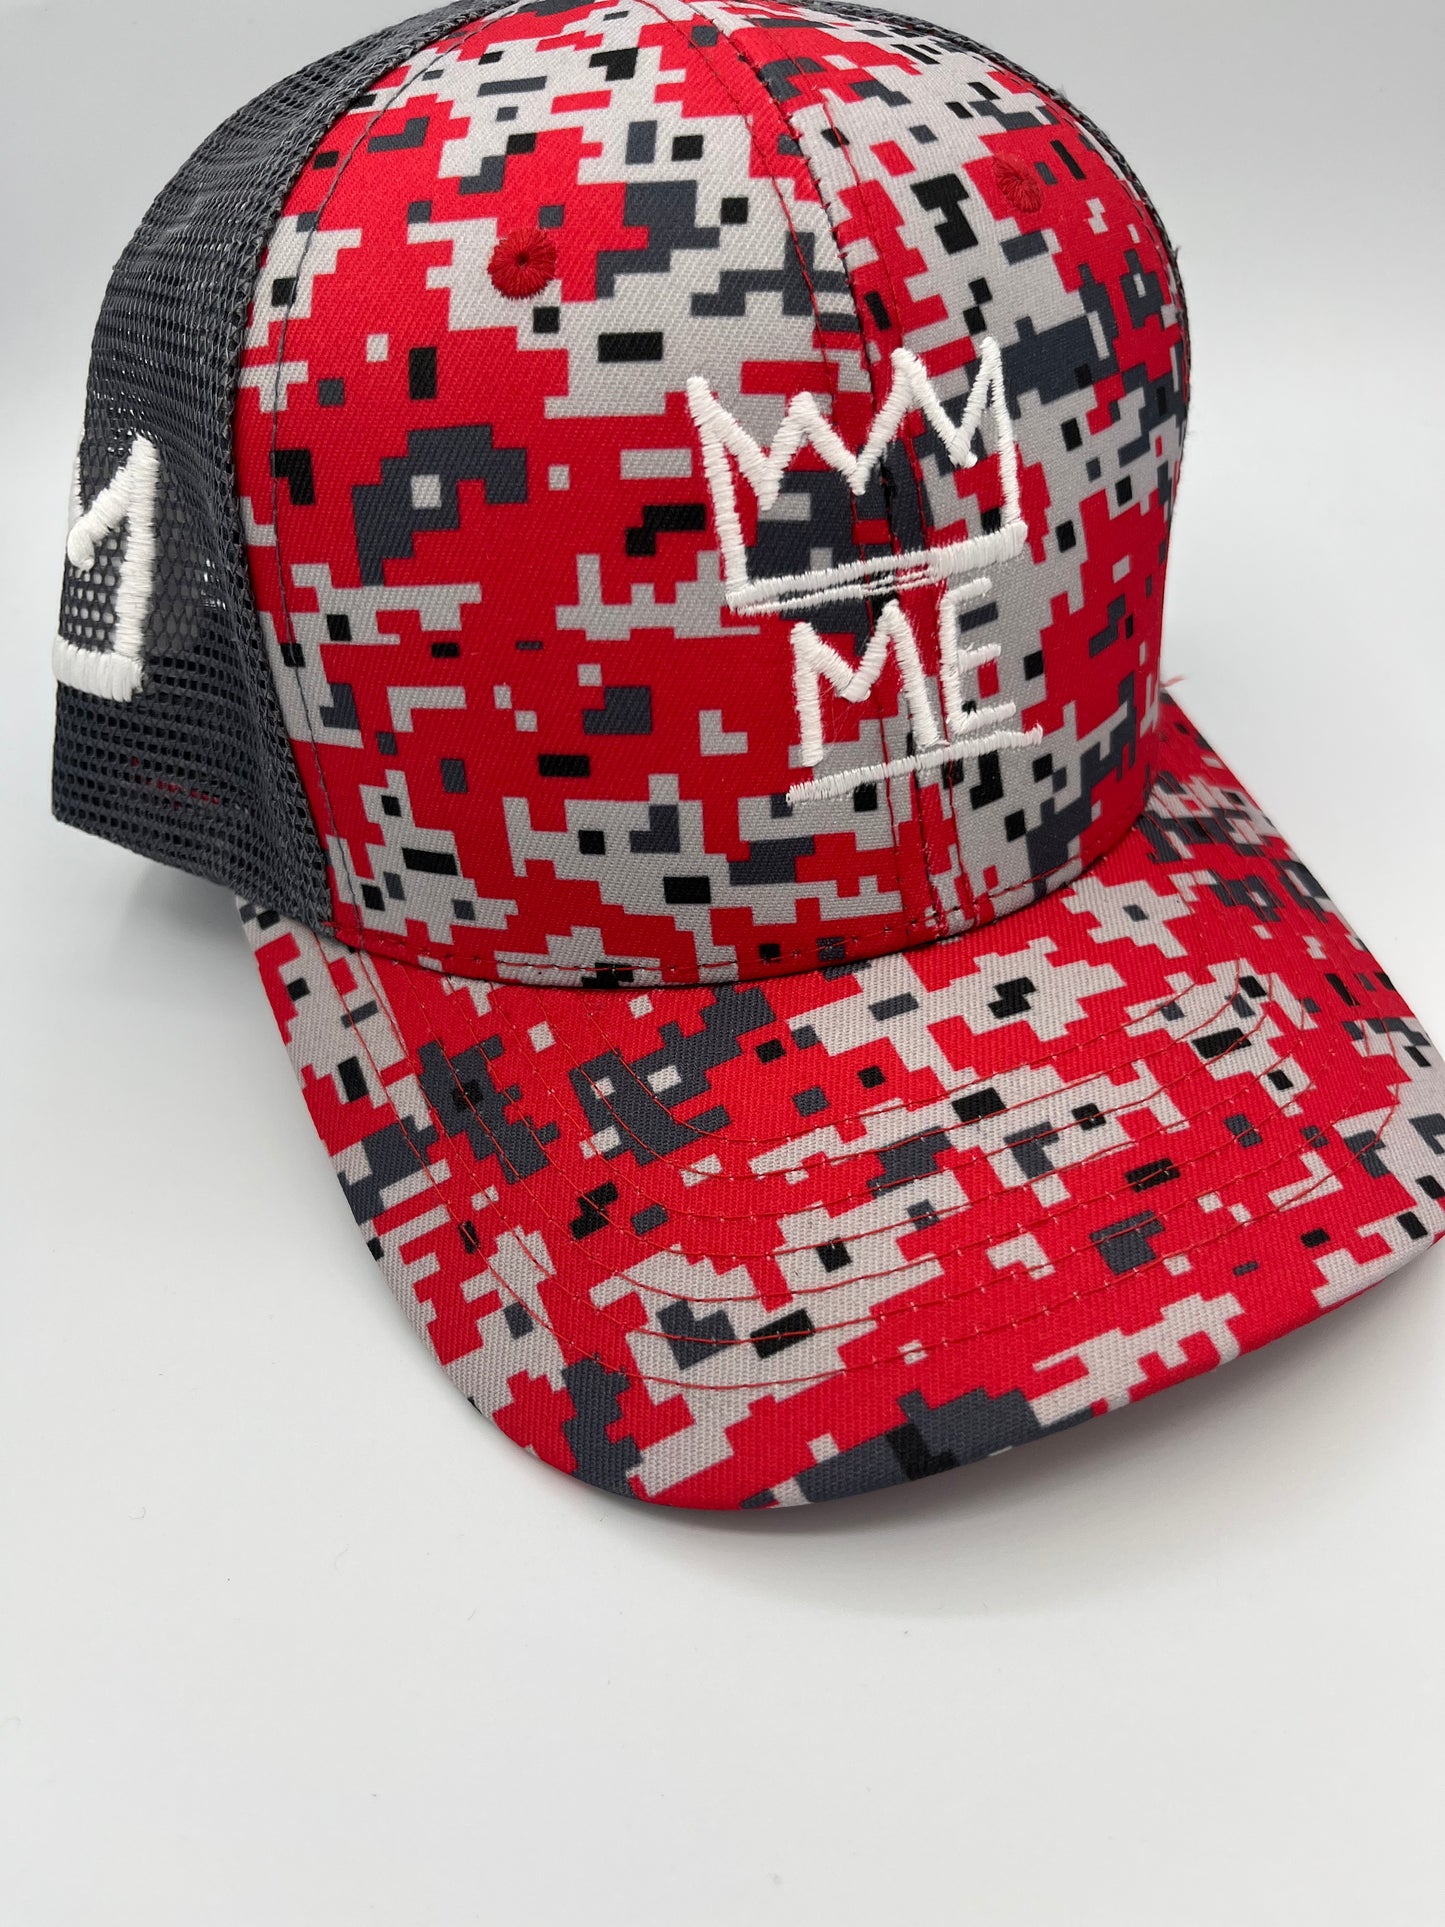 Pixelated Red, Gray, & Black Trucker with White Krown